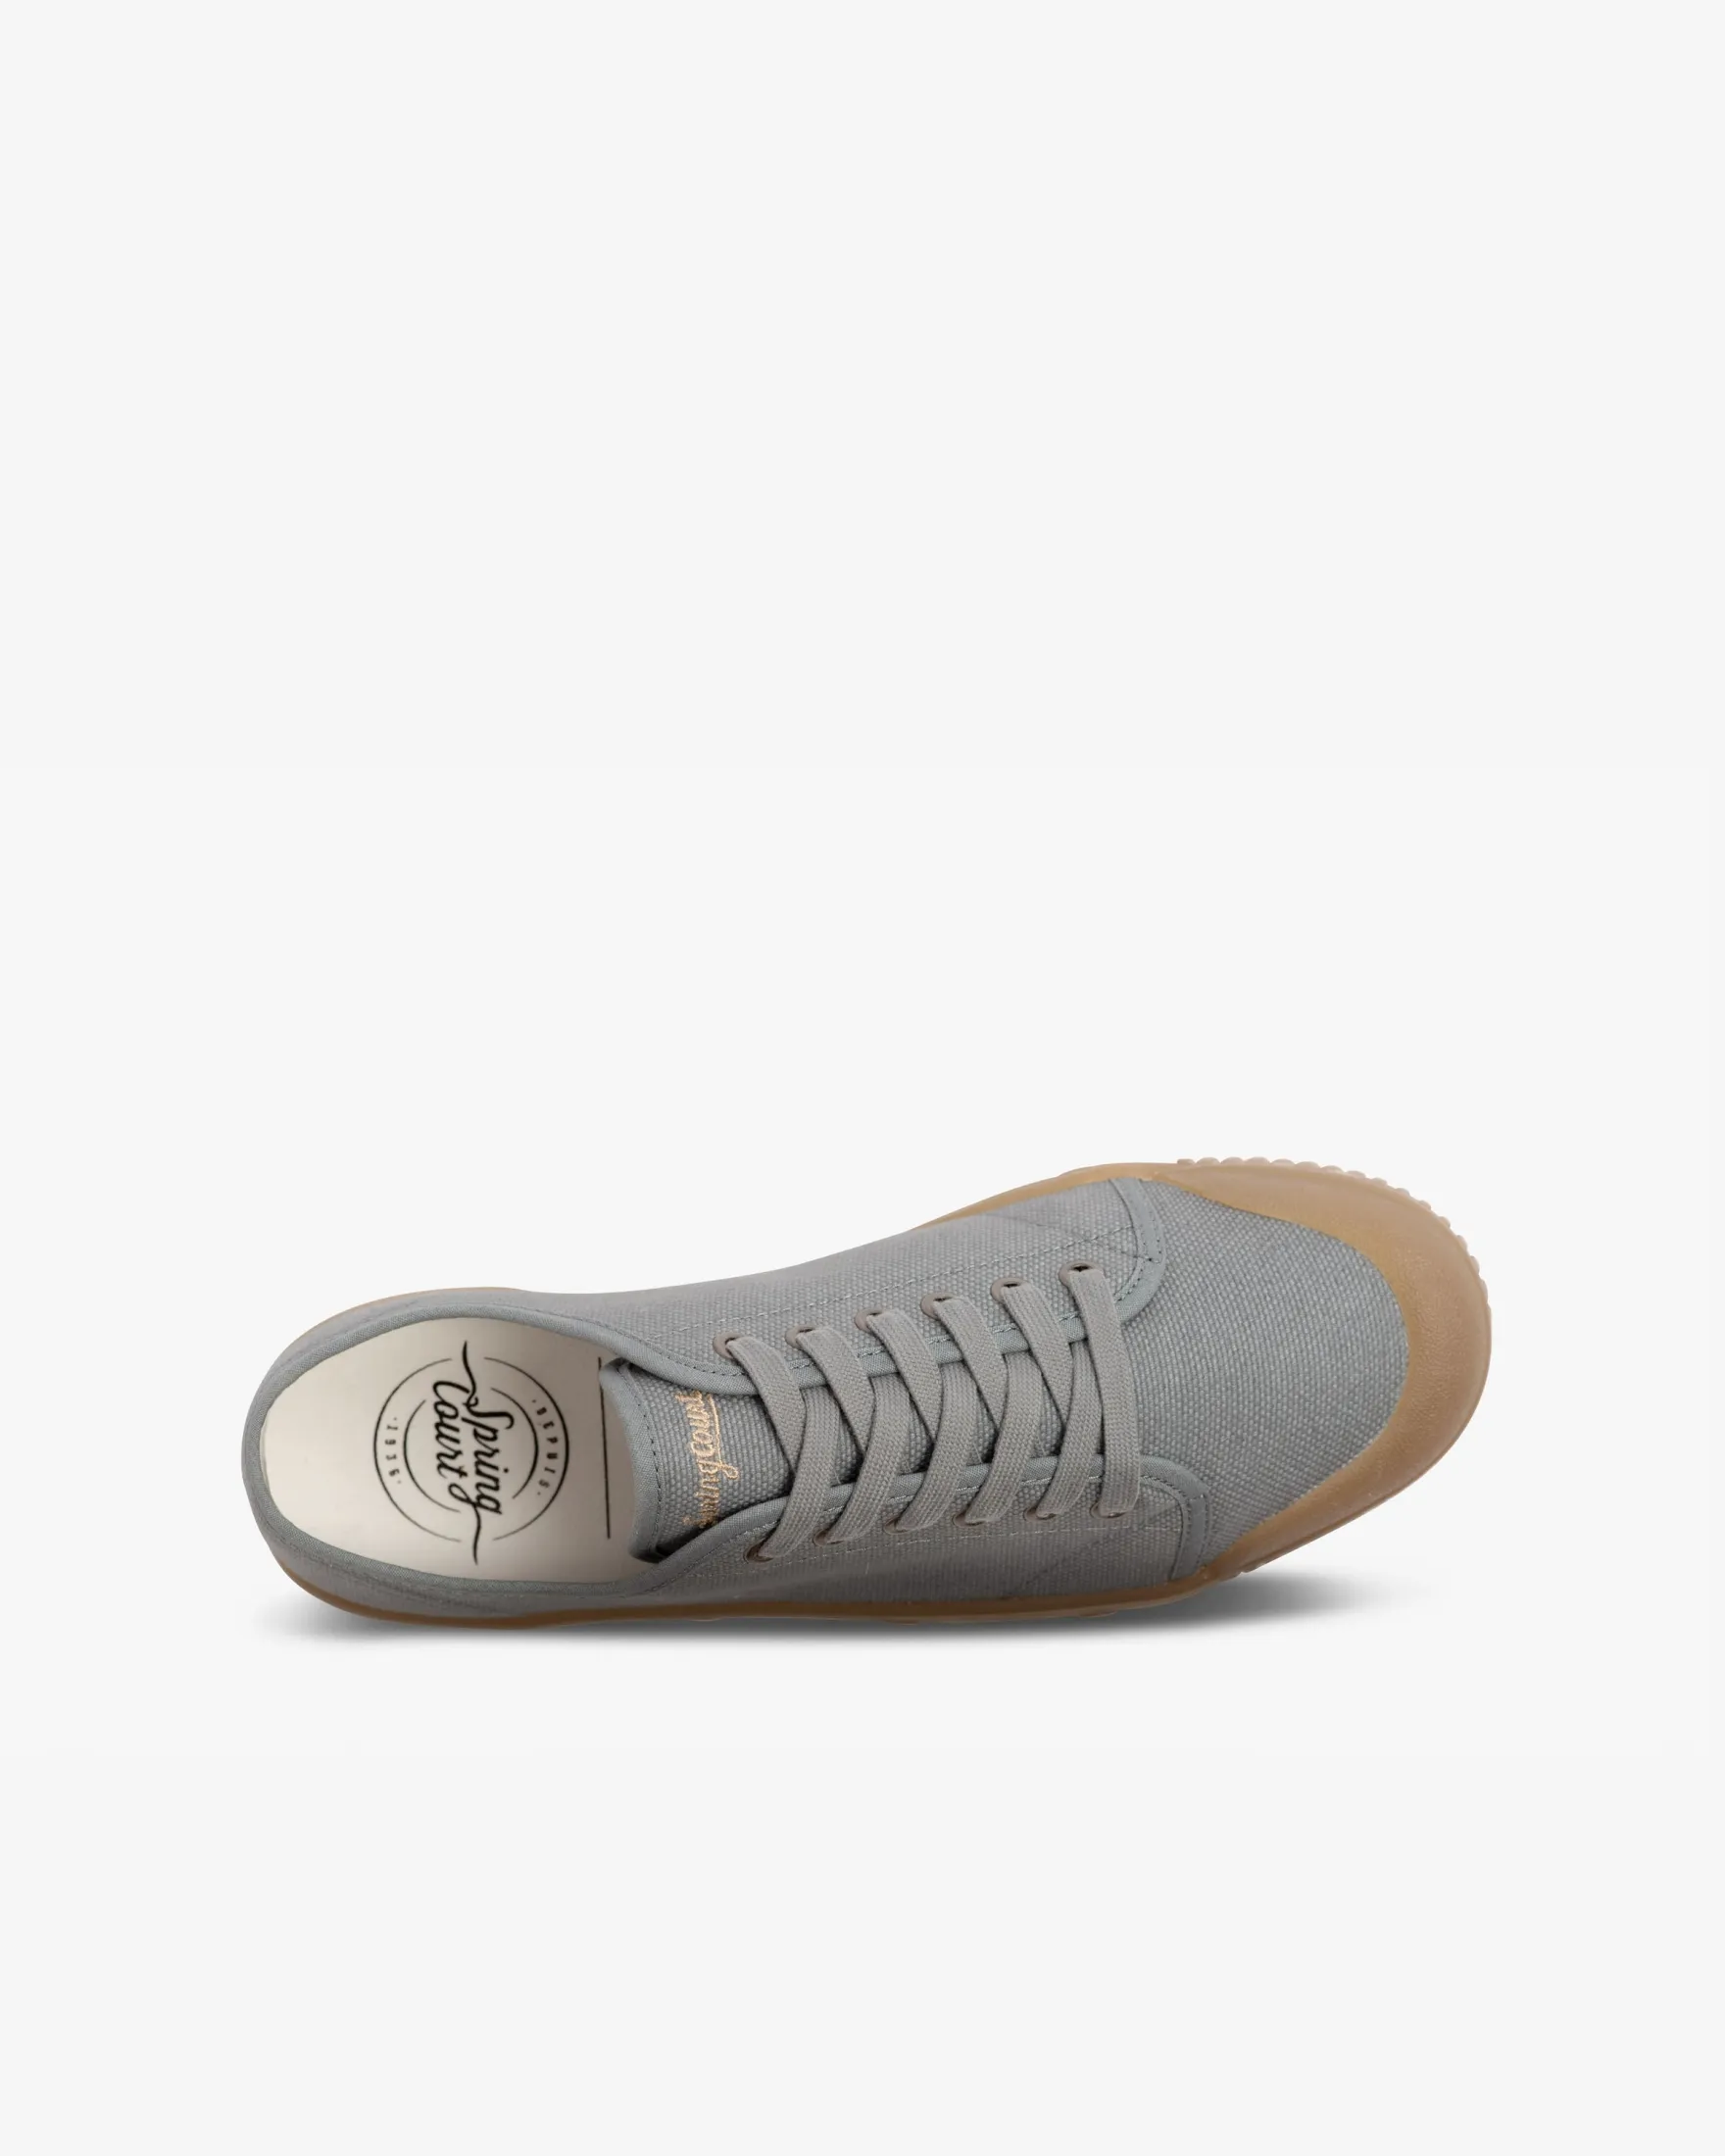 Blue grey cotton canvas low top trainers